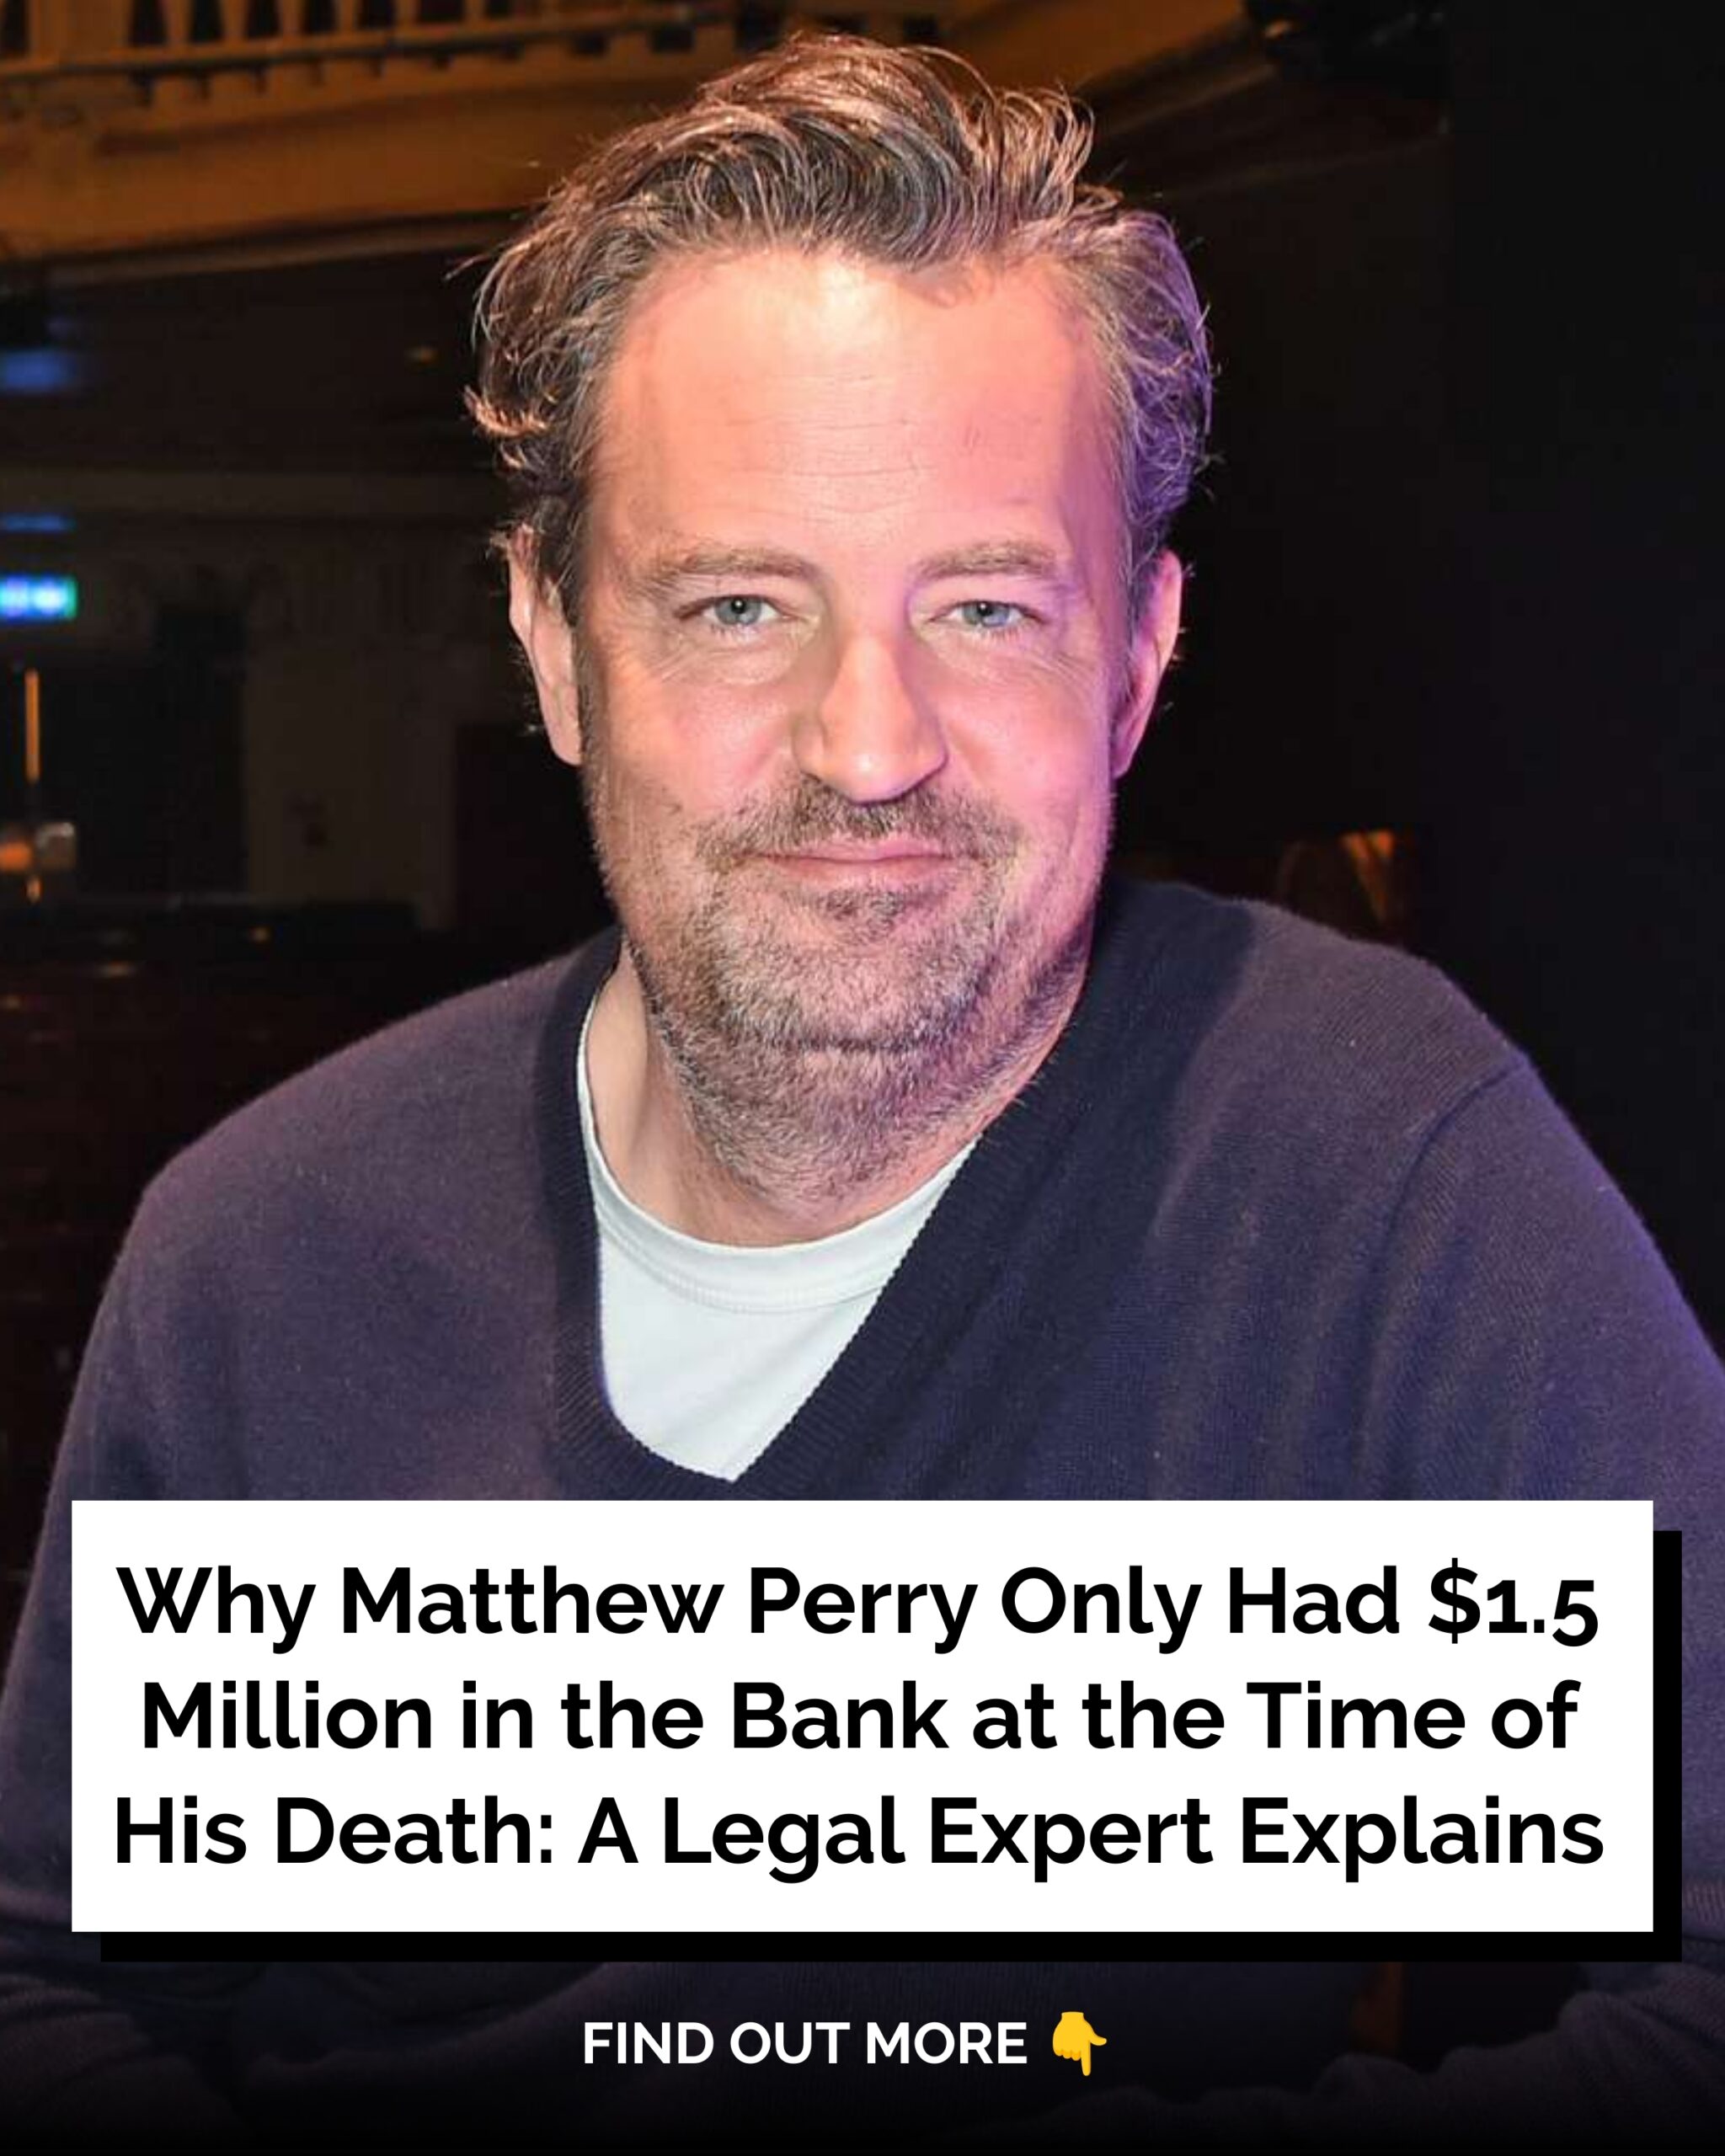 Why Matthew Perry Only Had $1.5 Million in the Bank at the Time of His Death: A Legal Expert Explains